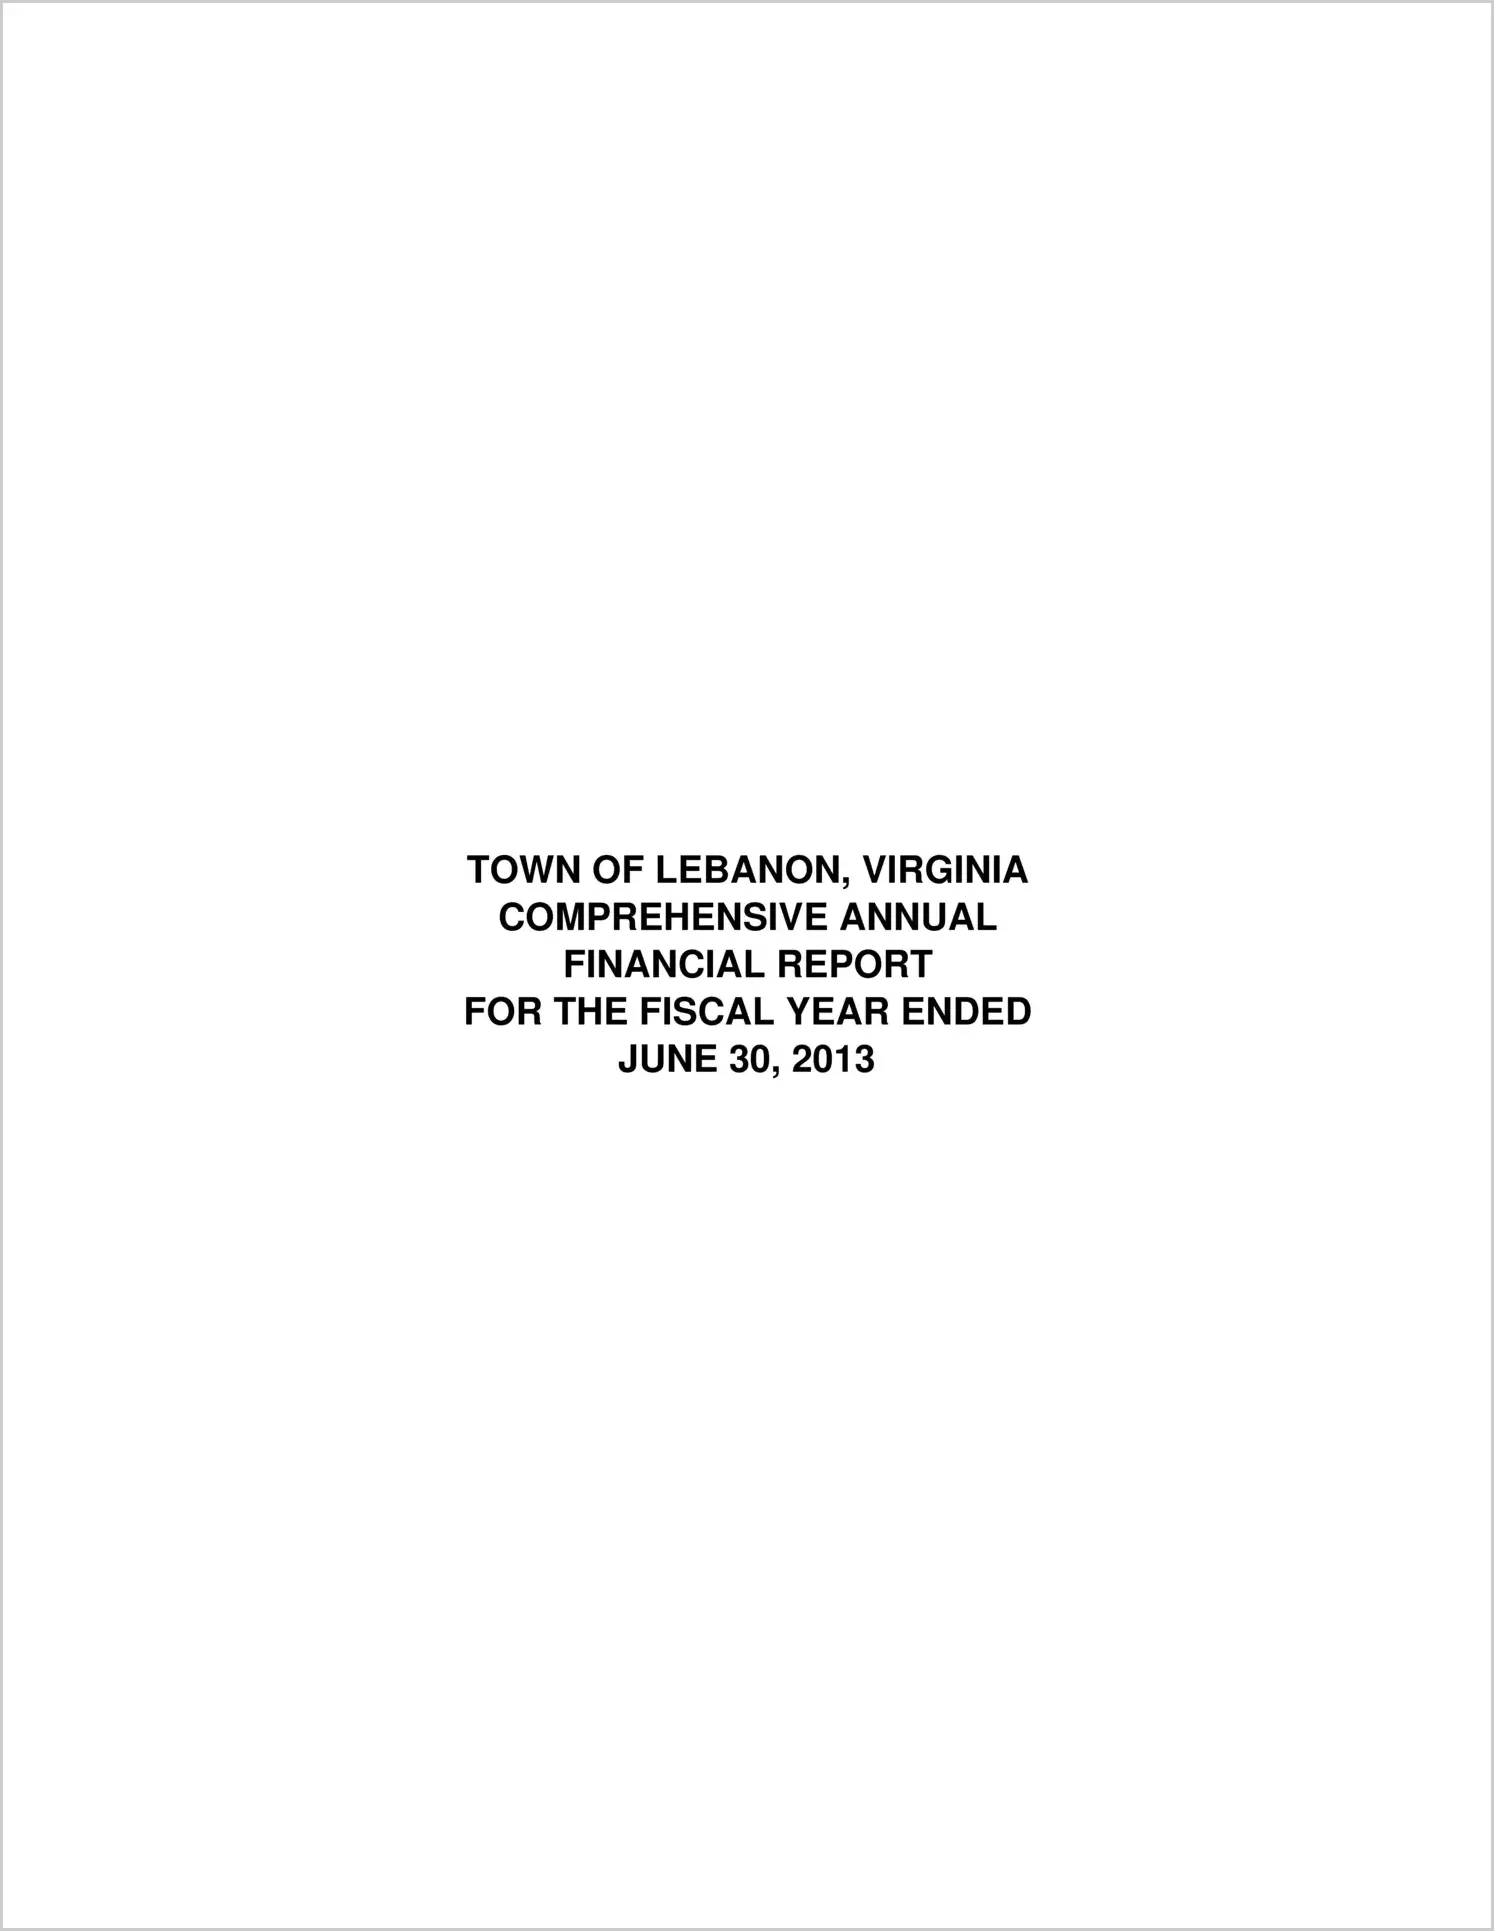 2013 Annual Financial Report for Town of Lebanon